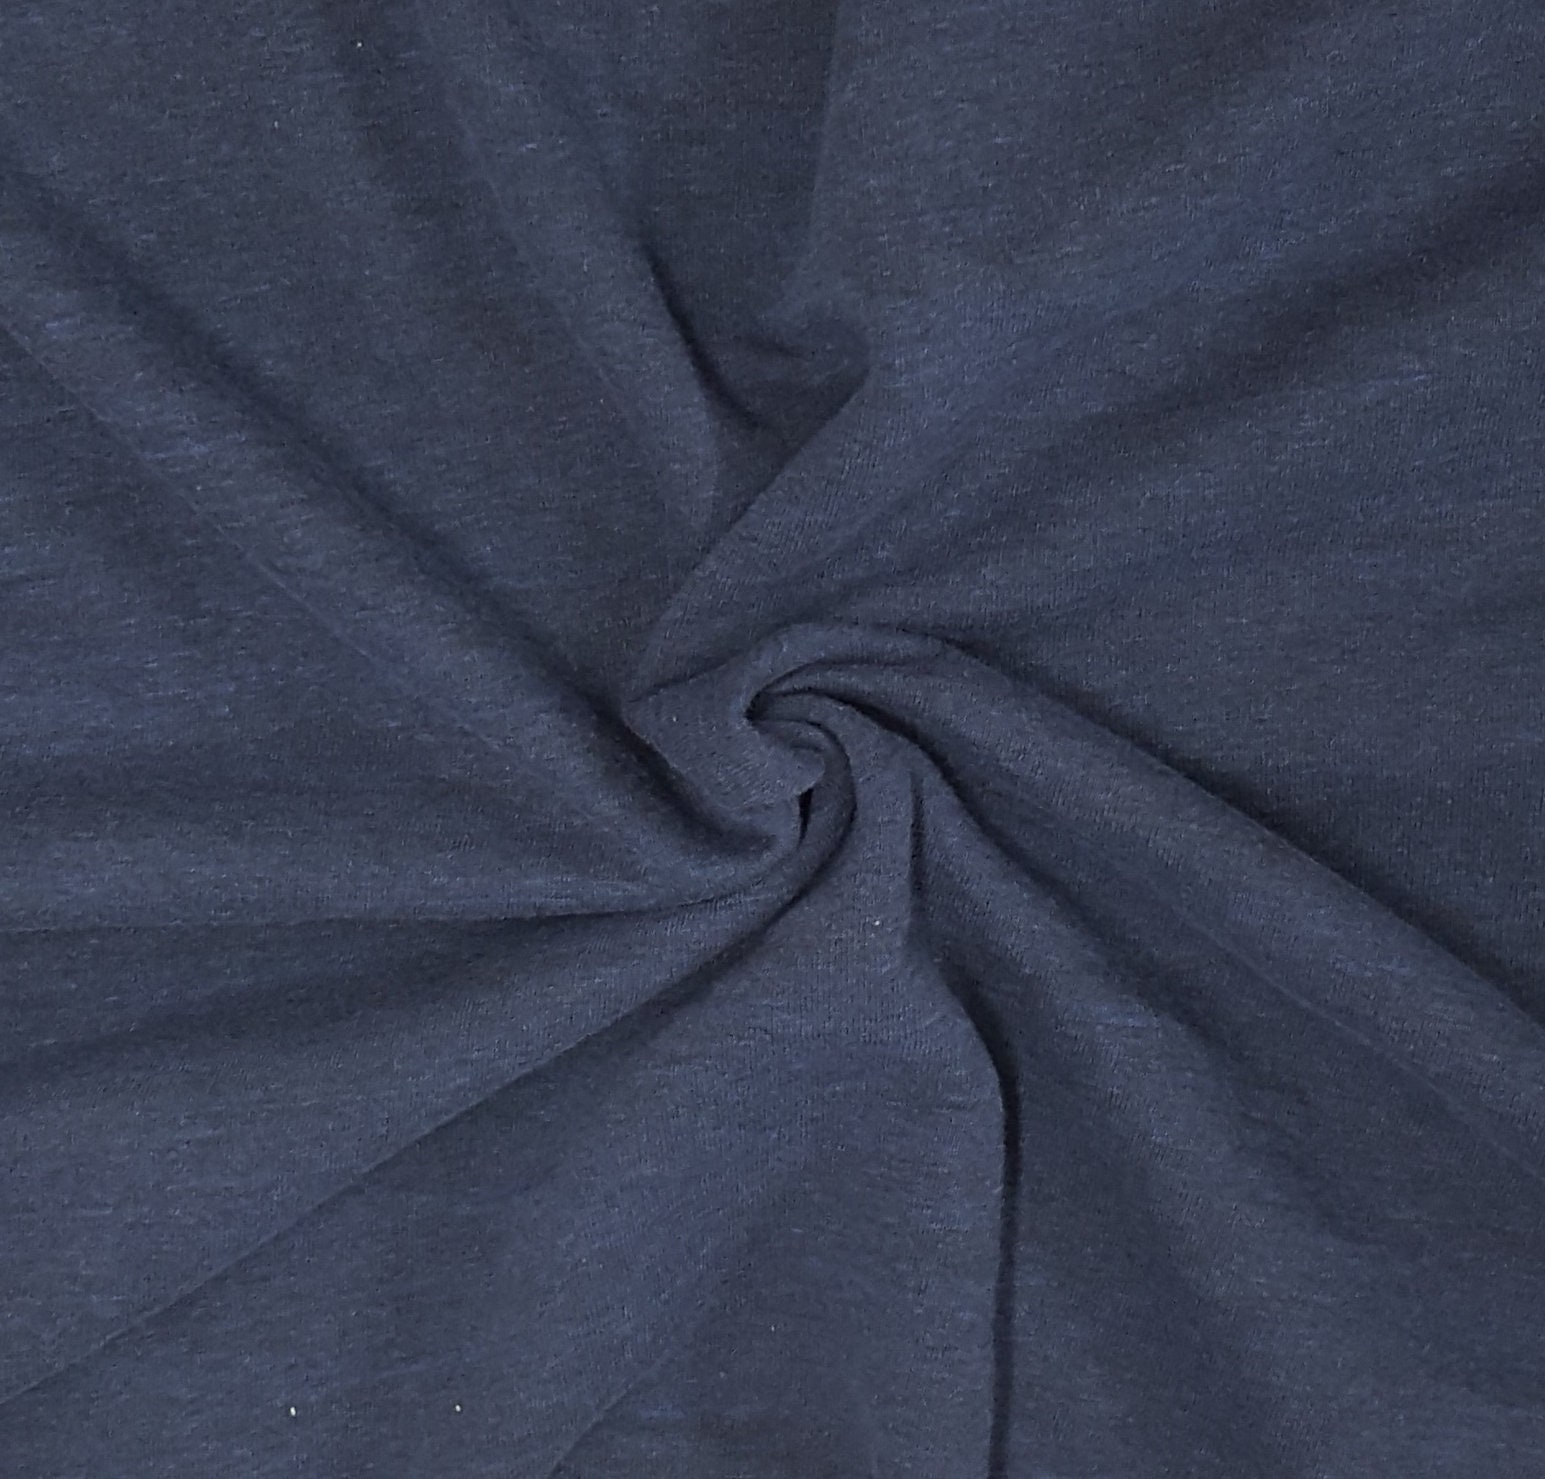 Heathered Royal Blue Athletic Activewear High Performance Poly Spandex  Fabric